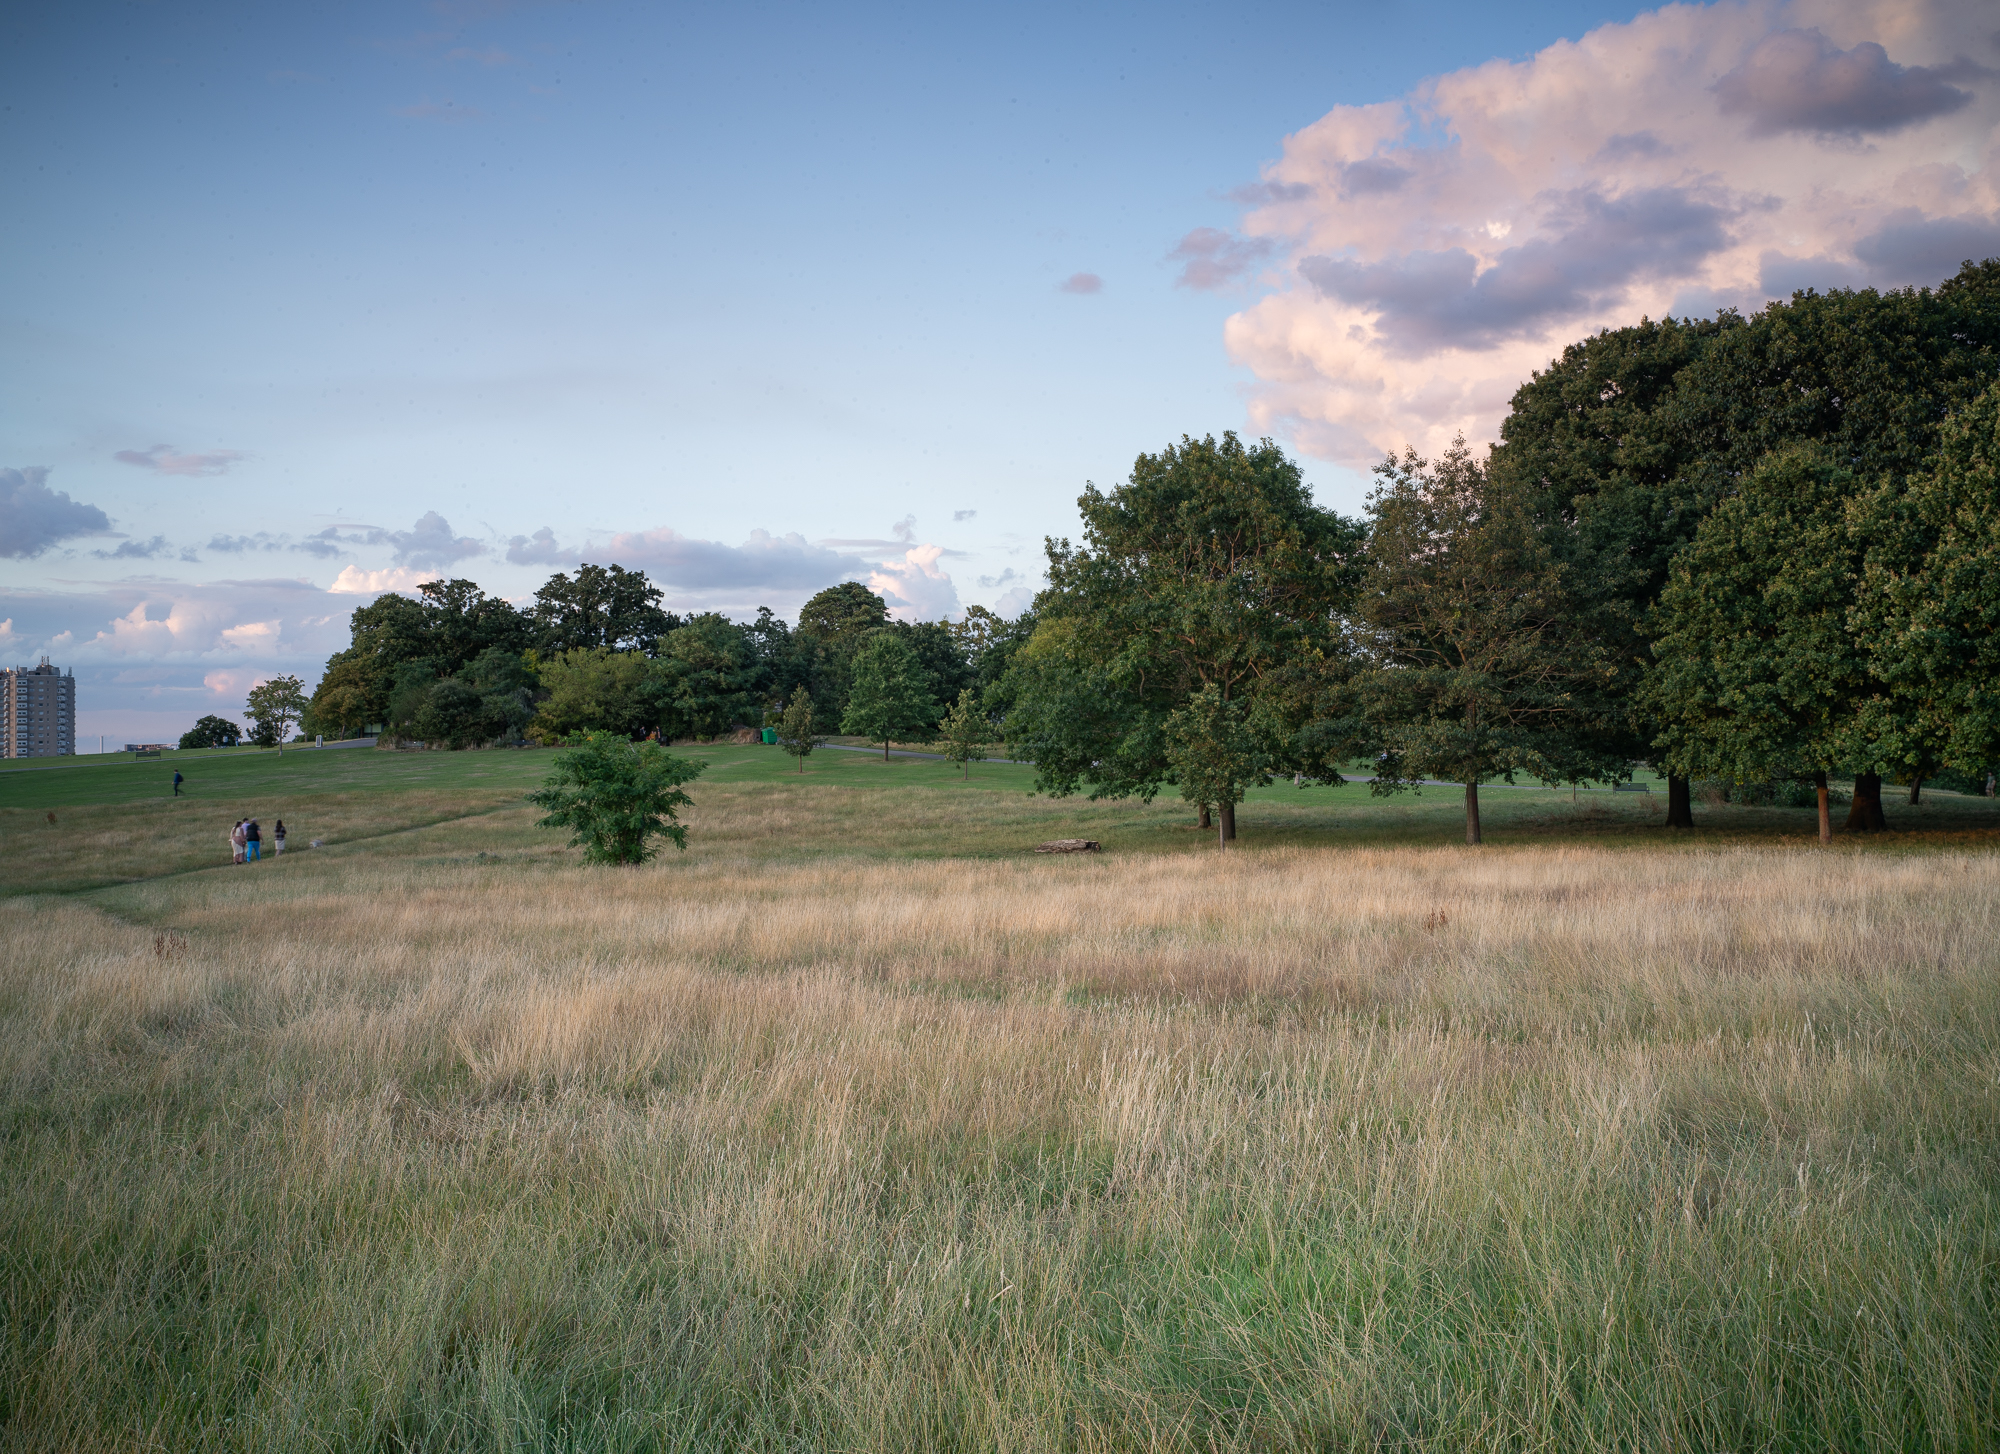 Statement: Removal of dead or dying trees in Brockwell Park